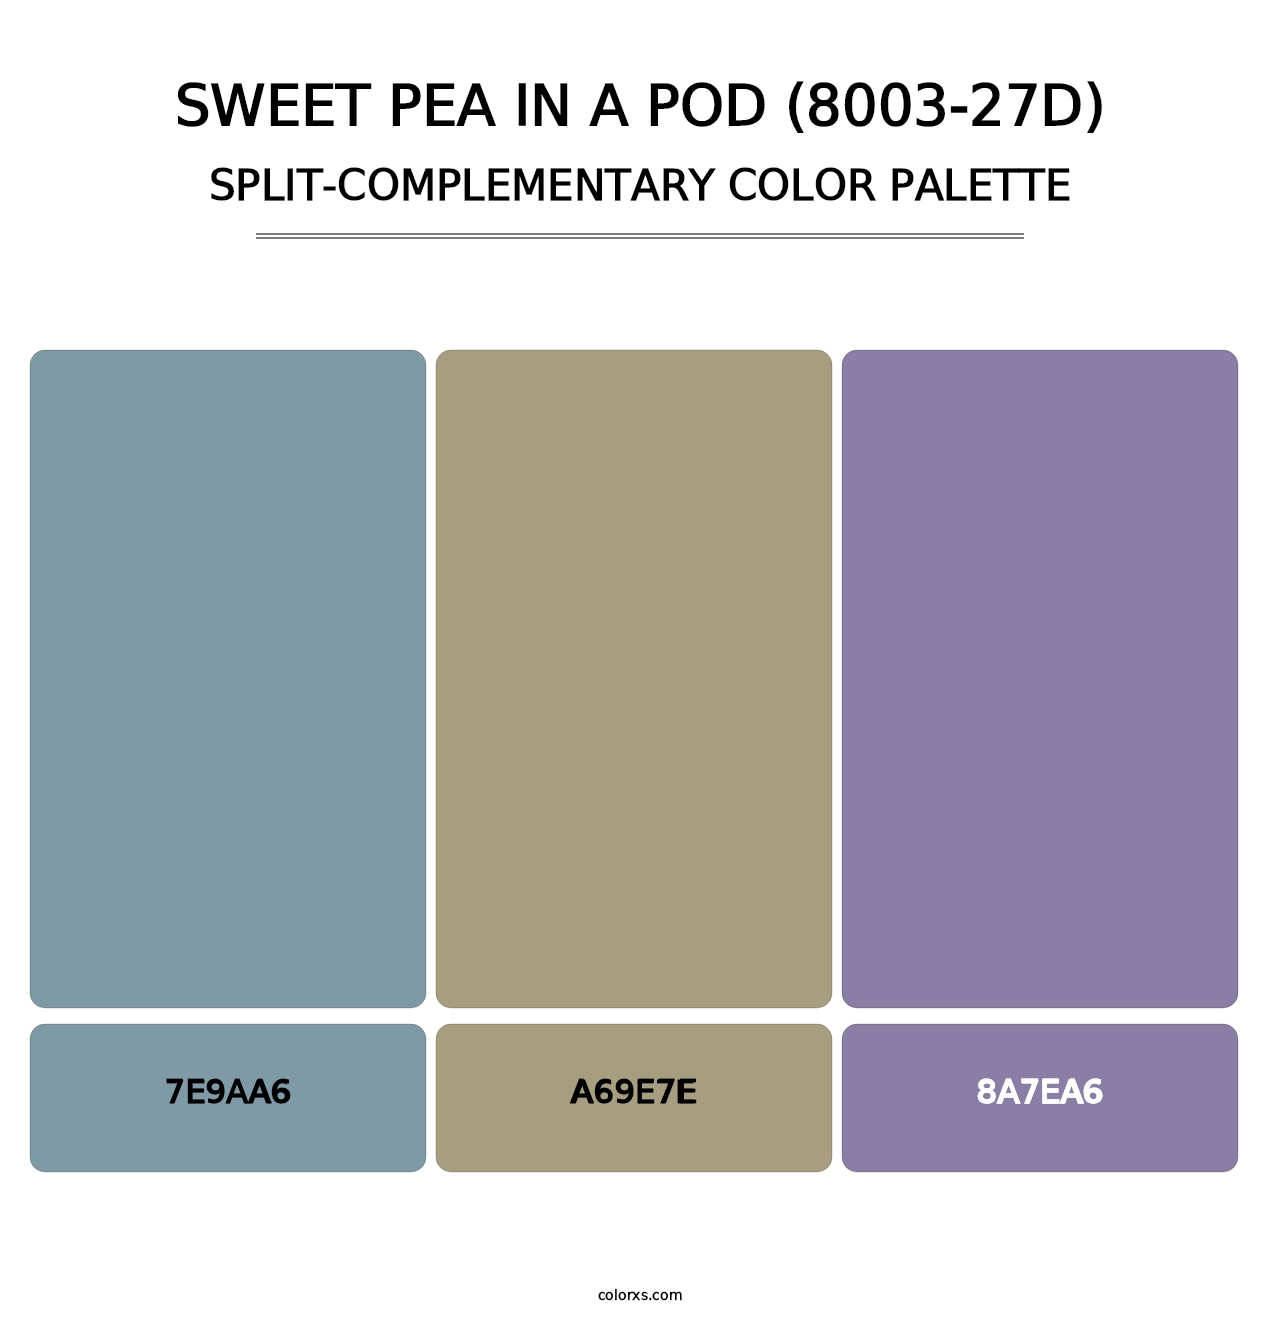 Sweet Pea in a Pod (8003-27D) - Split-Complementary Color Palette